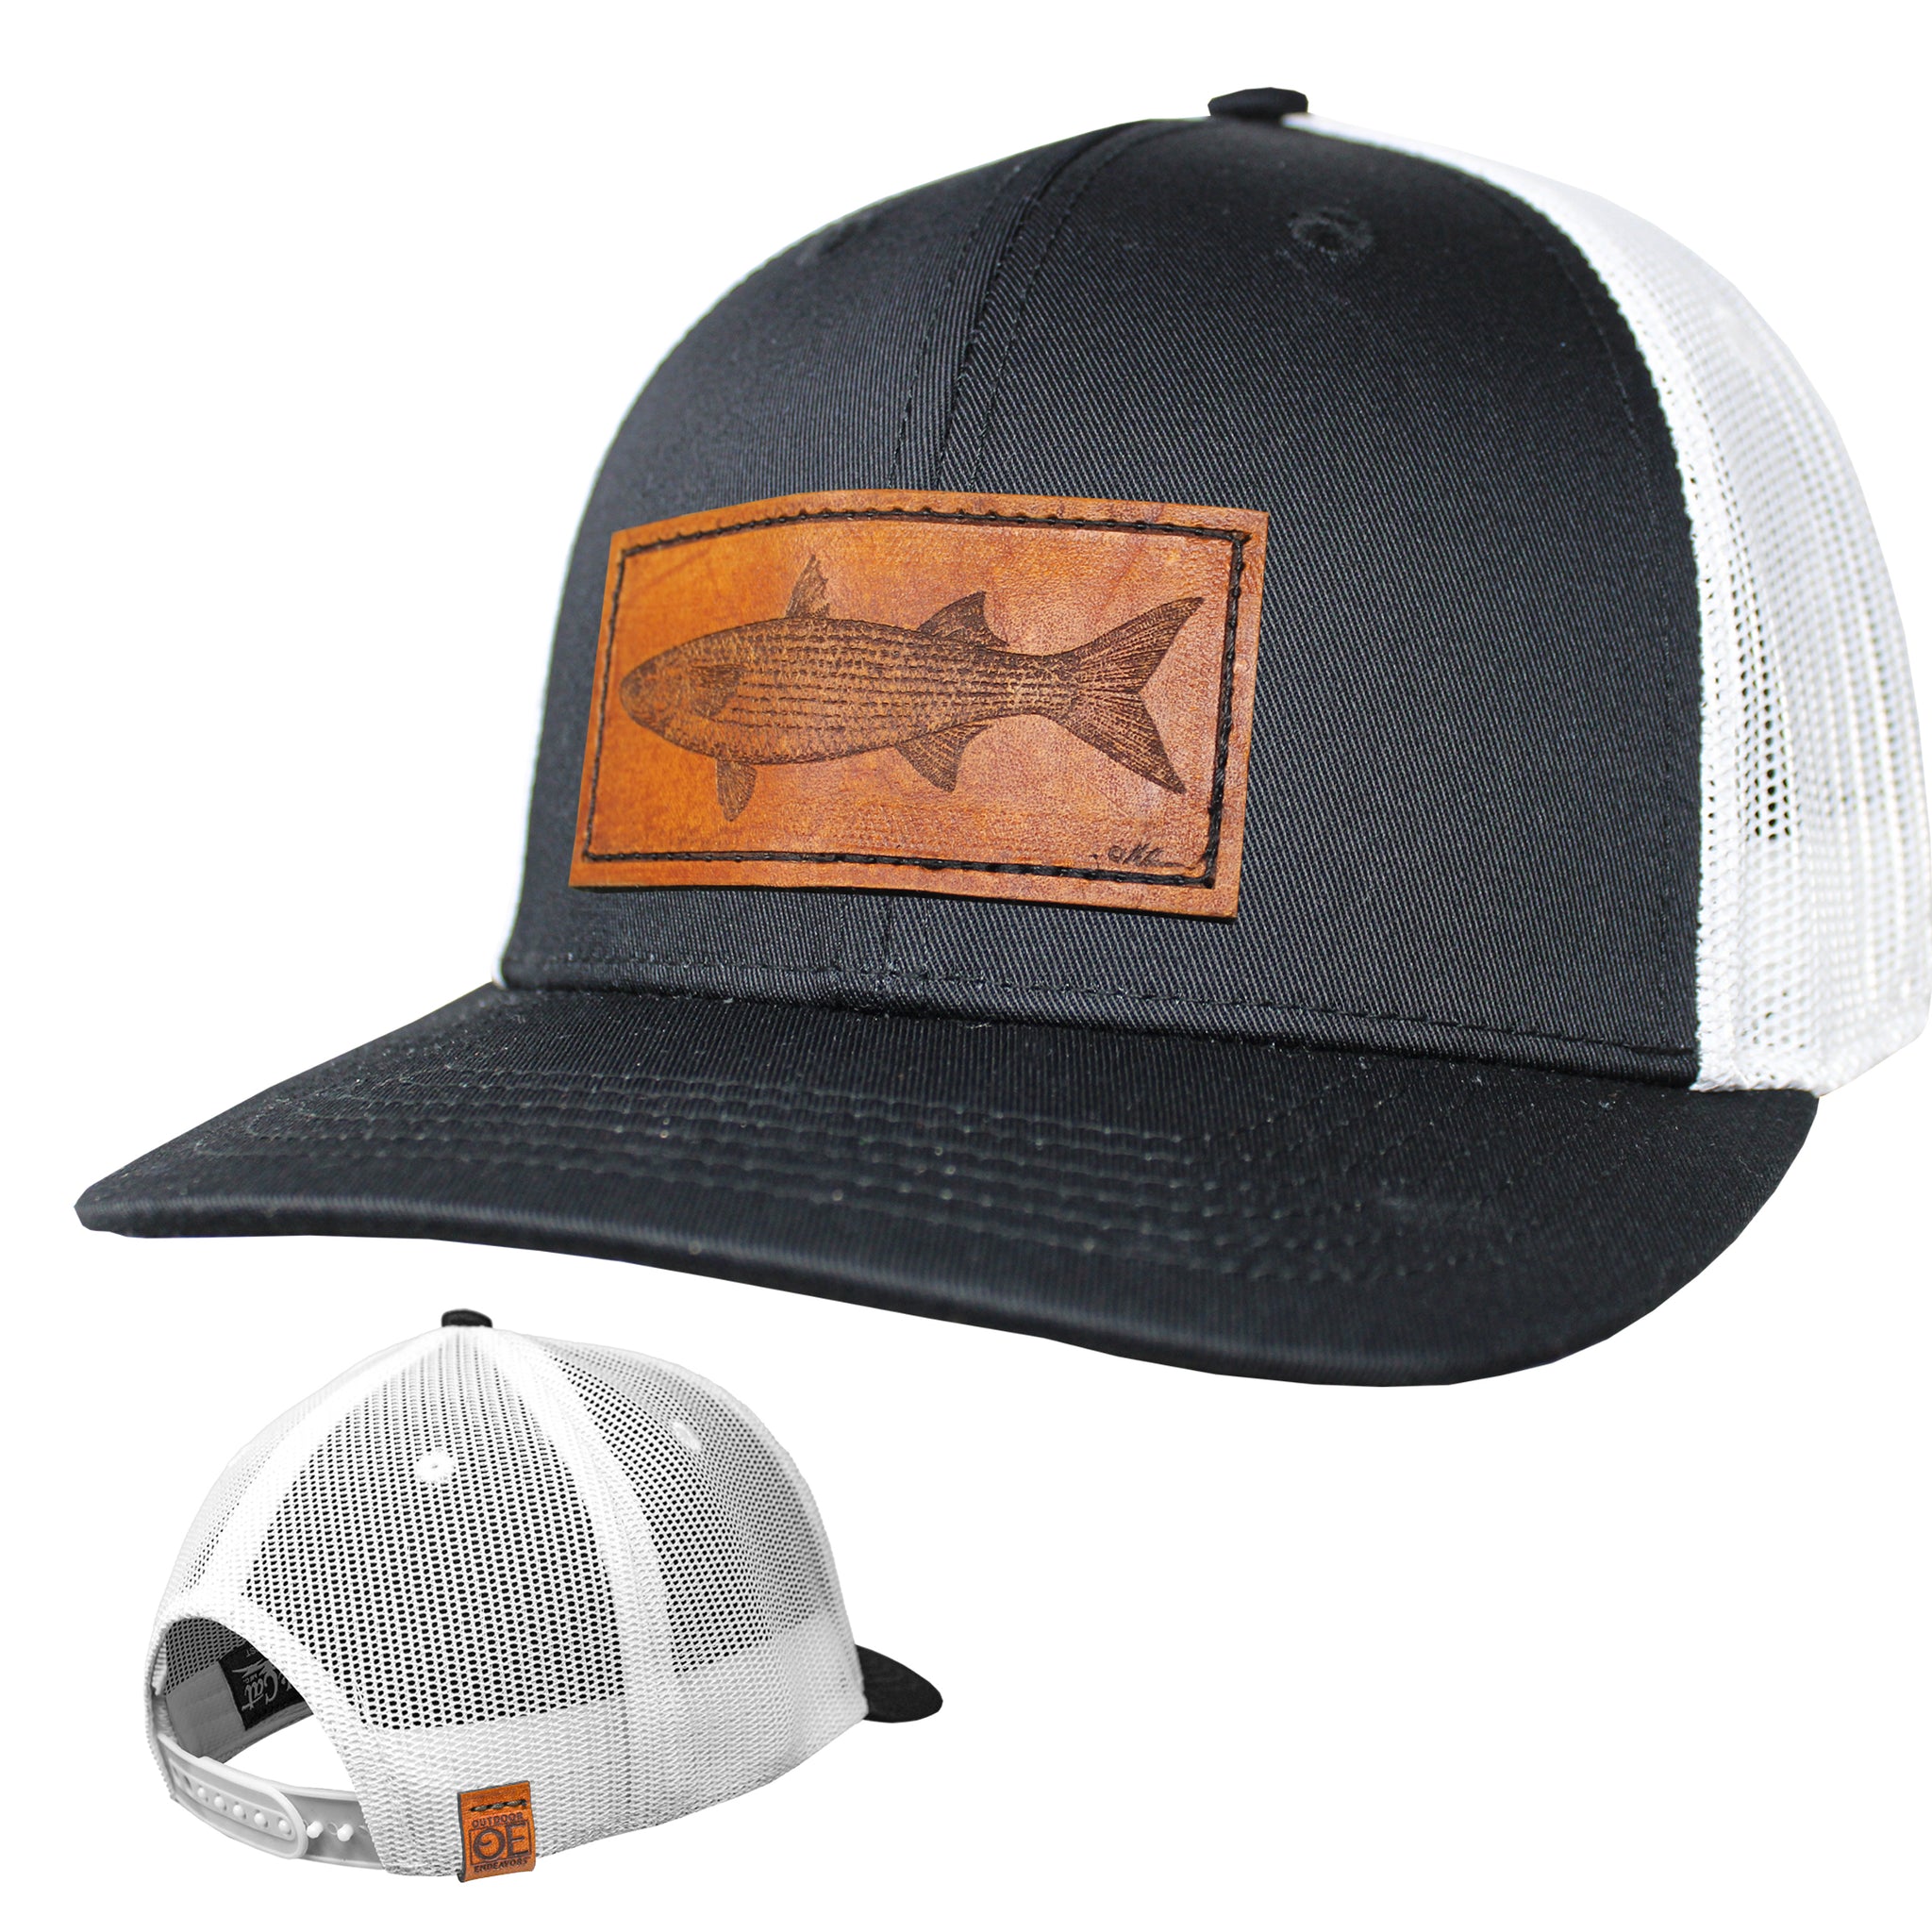 OE - Performance Trucker Hat - Mullet Leather Patch